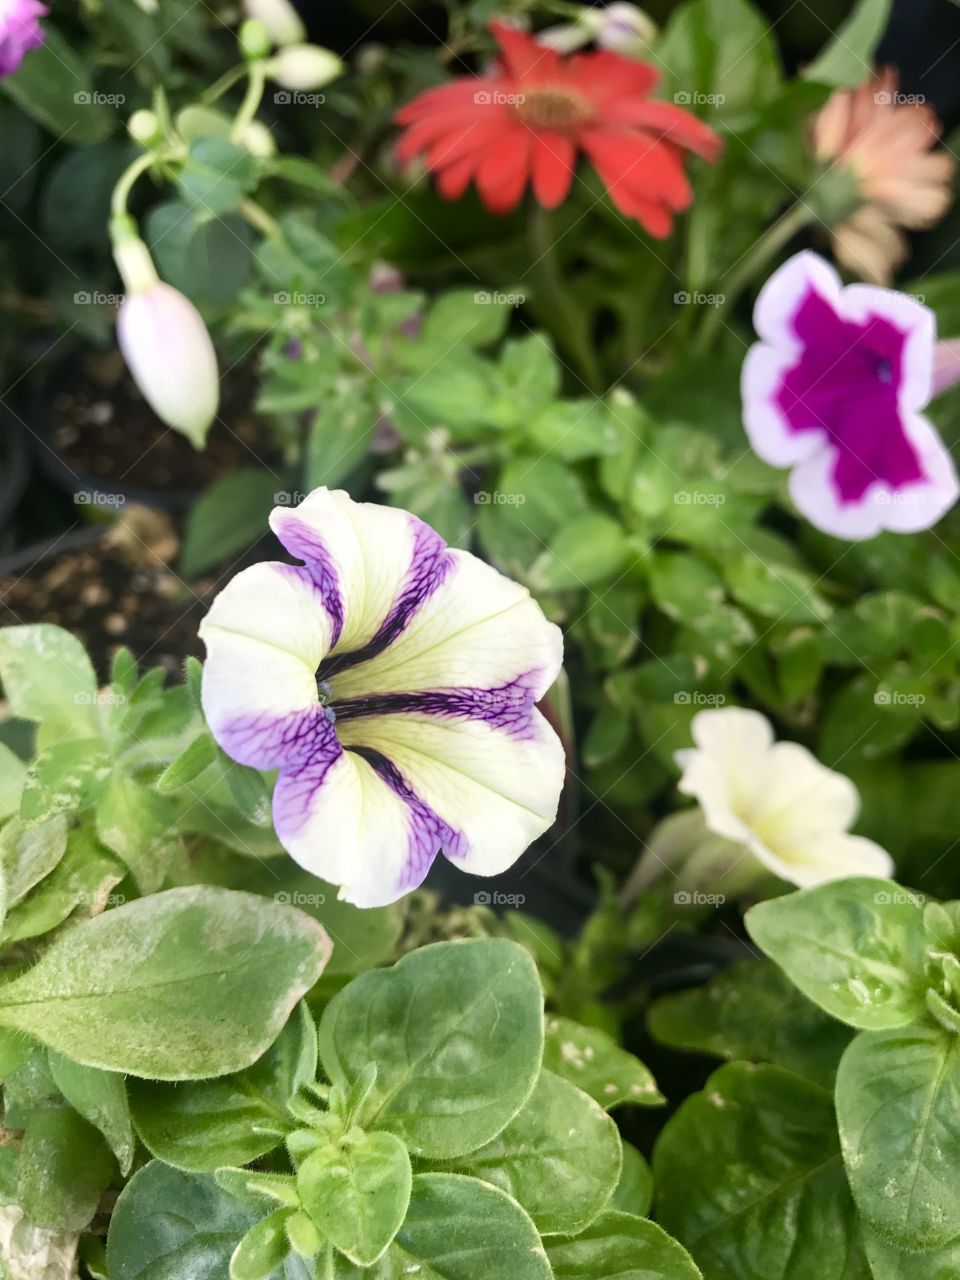 Purple and white morning glory flowers